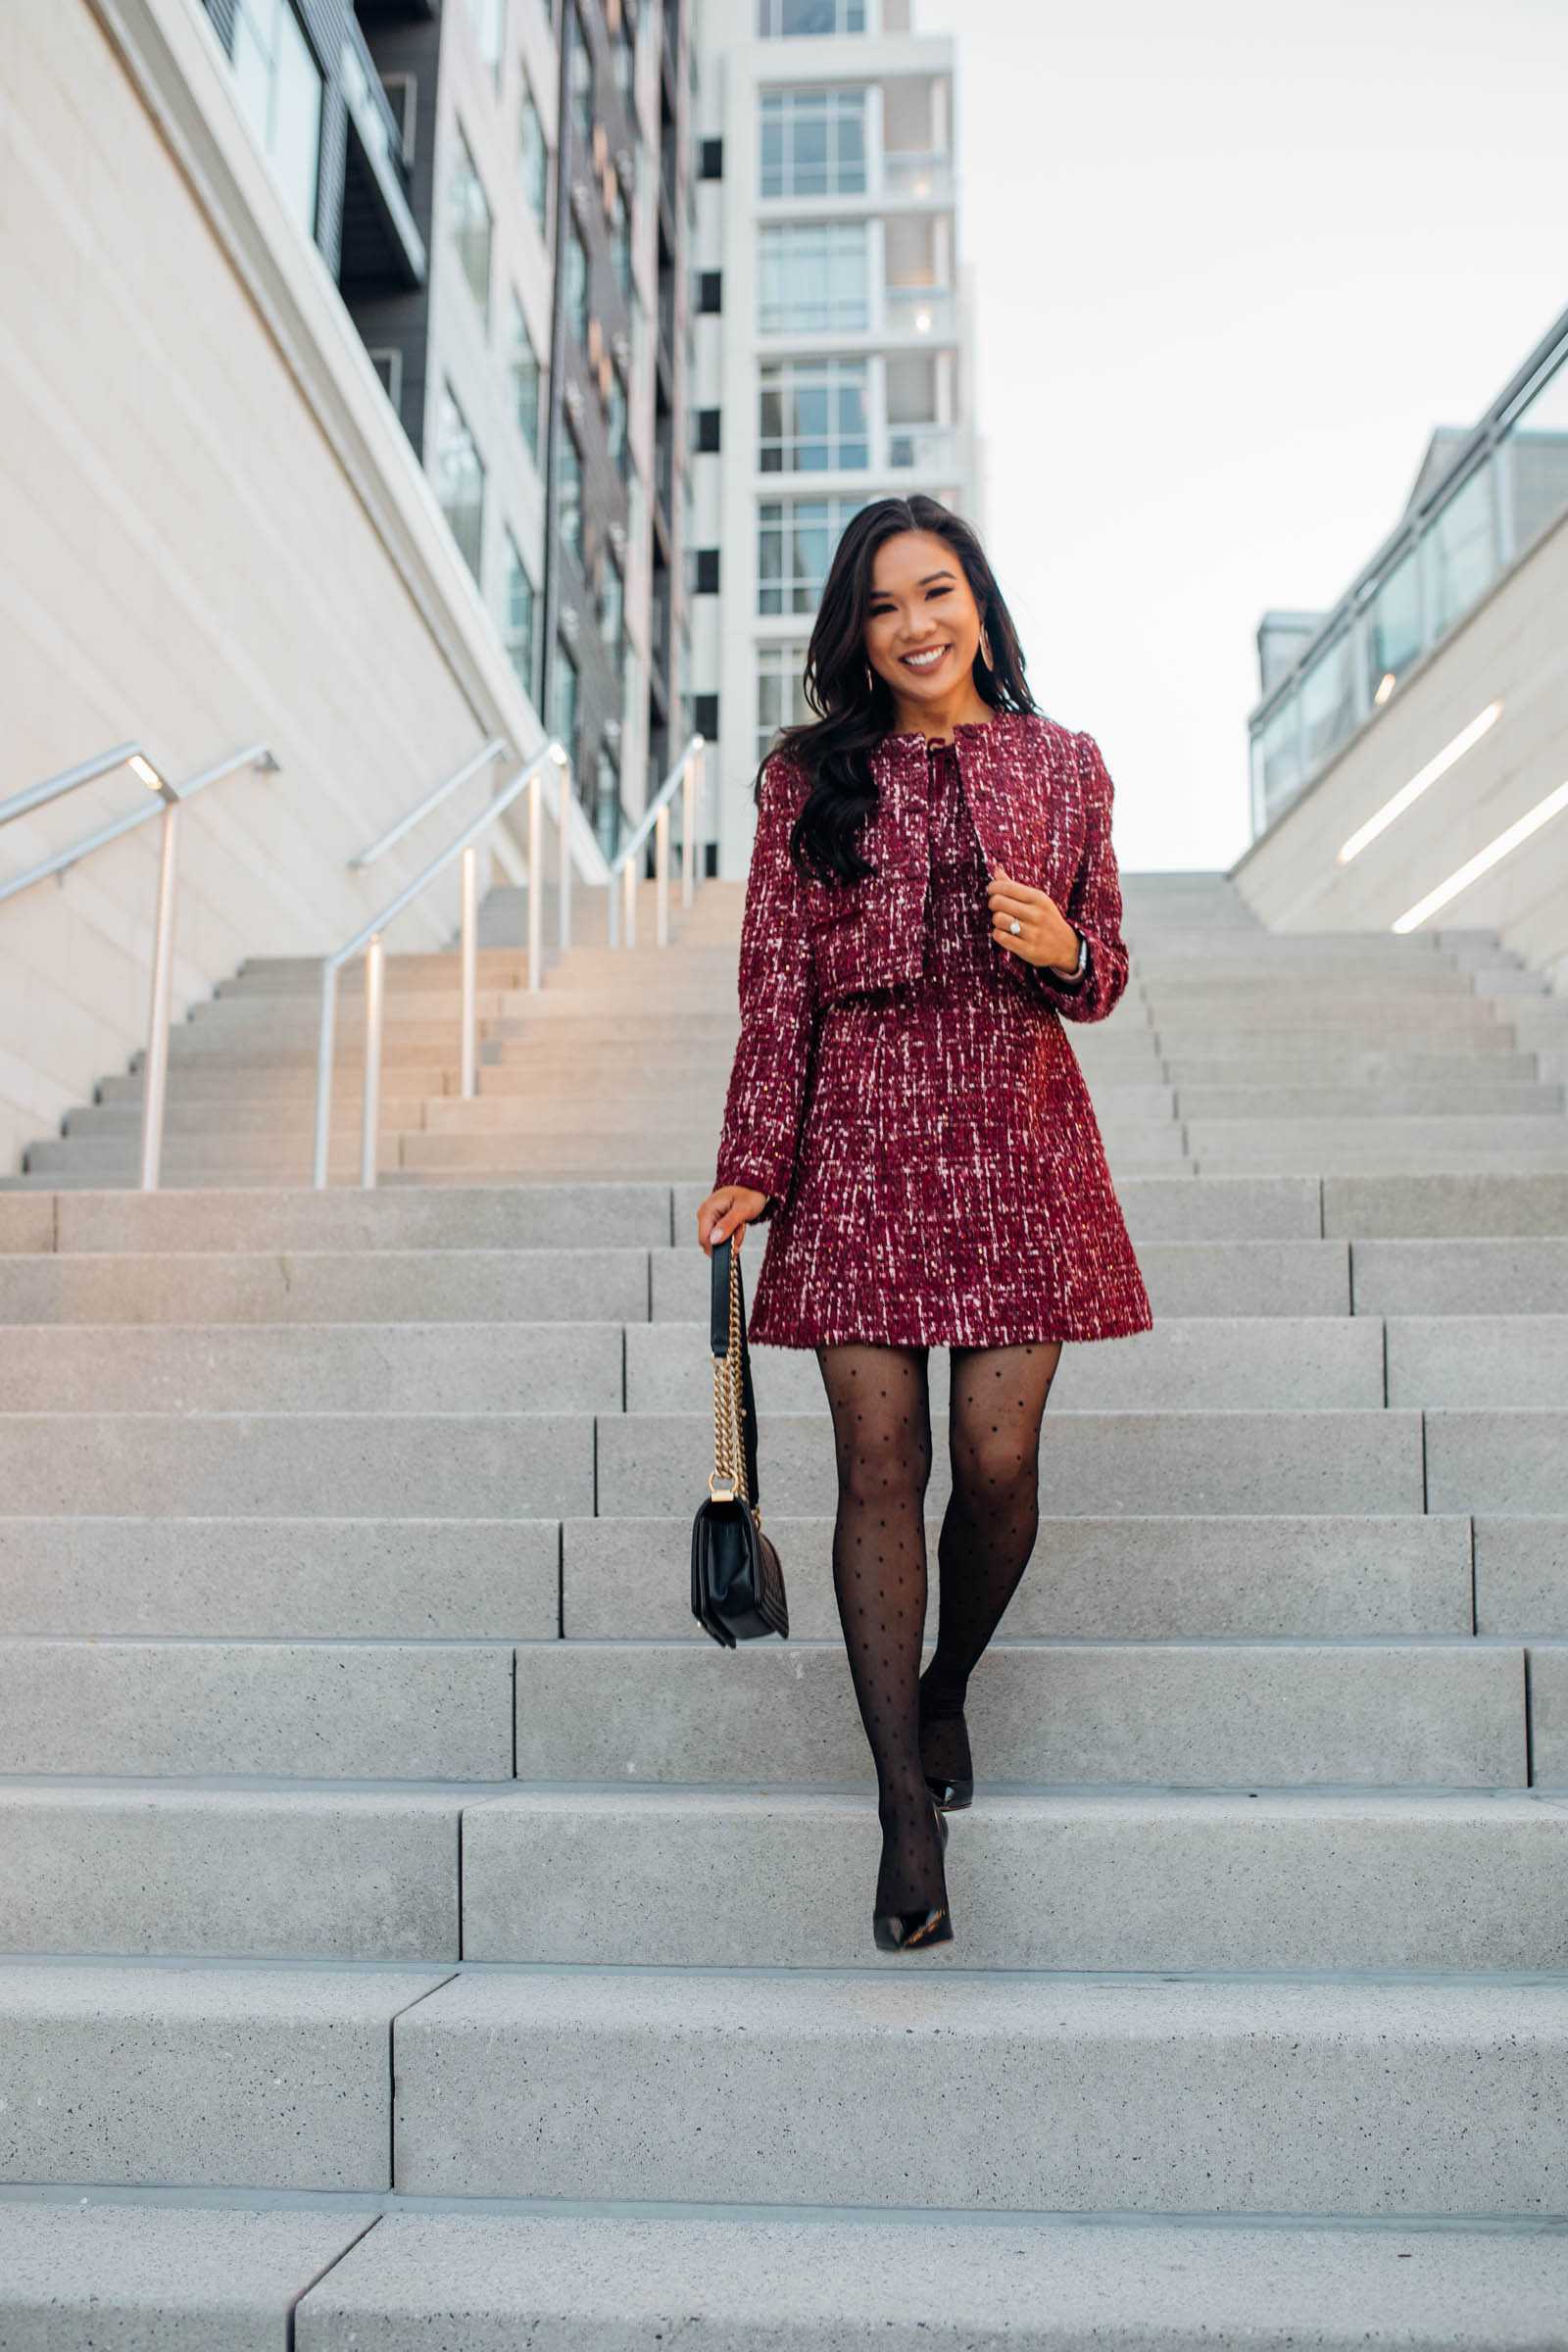 Blogger Hoang-Kim shares an office holiday party outfit idea wearing a matching tweed dress and jacket